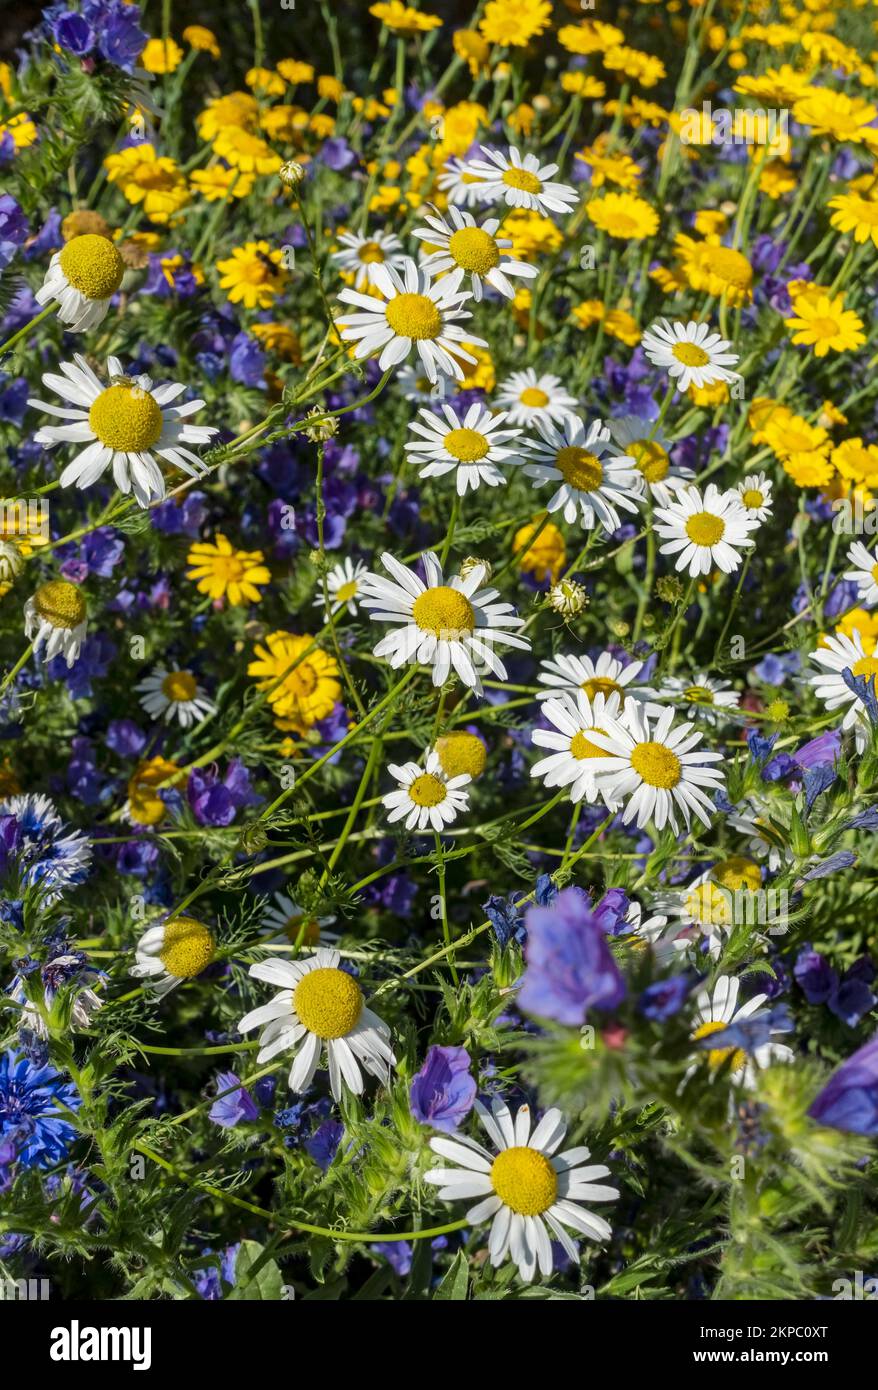 Close up of yellow corn marigolds white daisies daisy and blue echium flowers growing in a wildflower meadow garden border in summer England UK GB Stock Photo